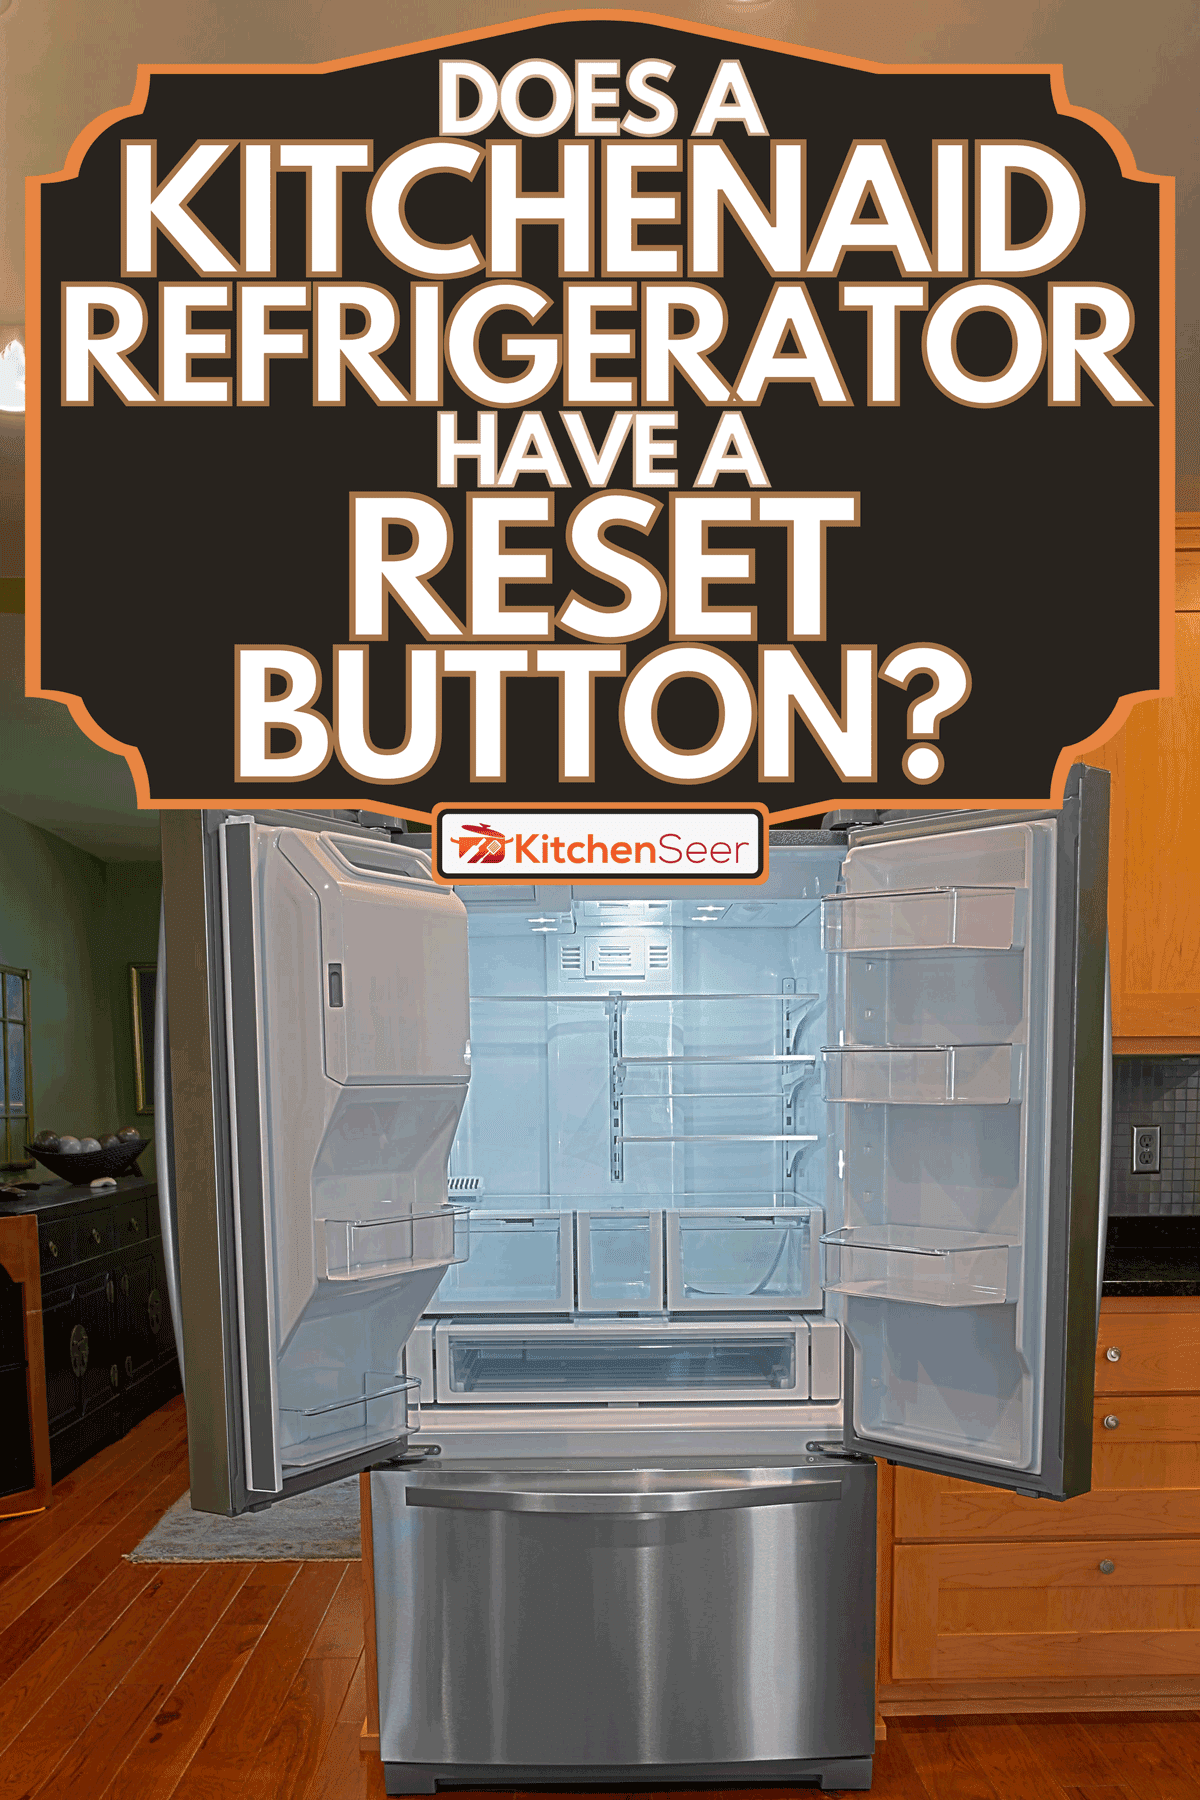 Luxurious kitchen with new refrigerator, Does A KitchenAid Refrigerator Have A Reset Button?